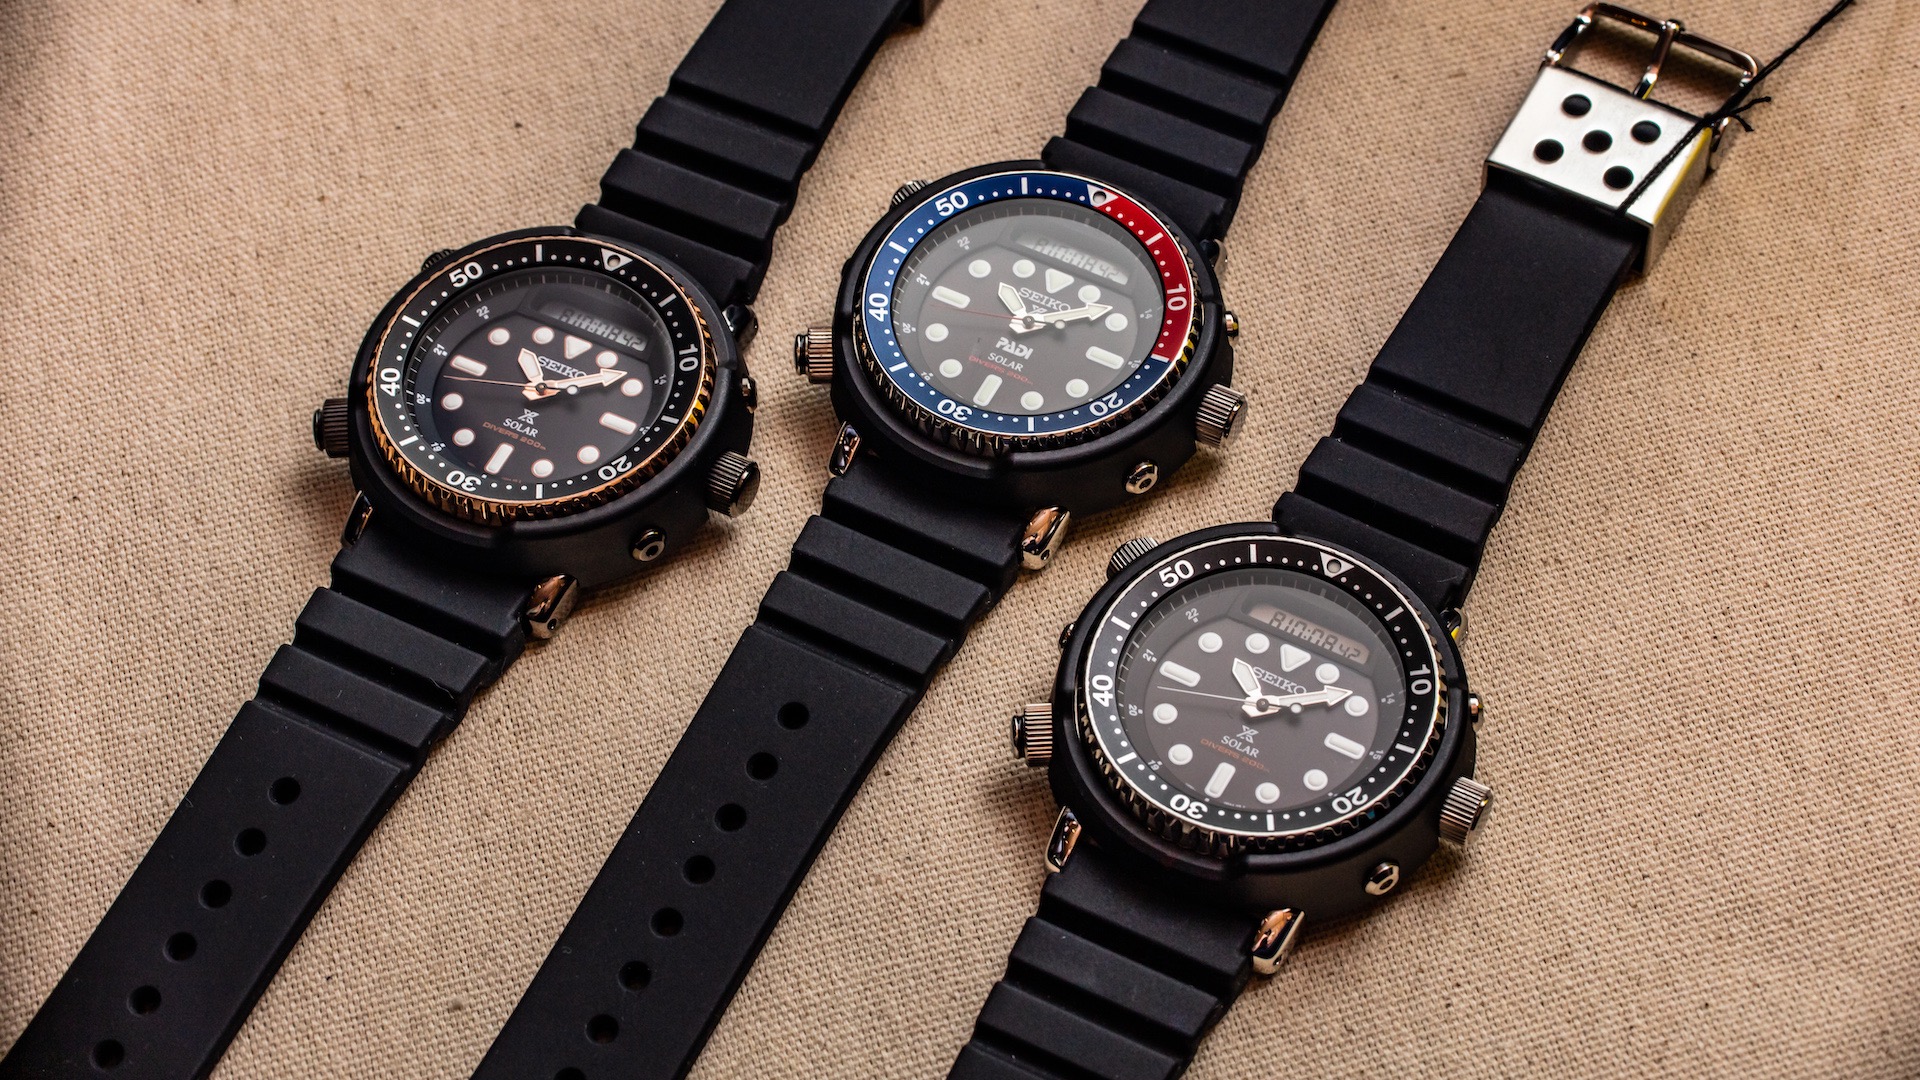 Hands-On With The Reissued Seiko Solar ‘Arnie’ Prospex SNJ025 & SNJ027 Watches